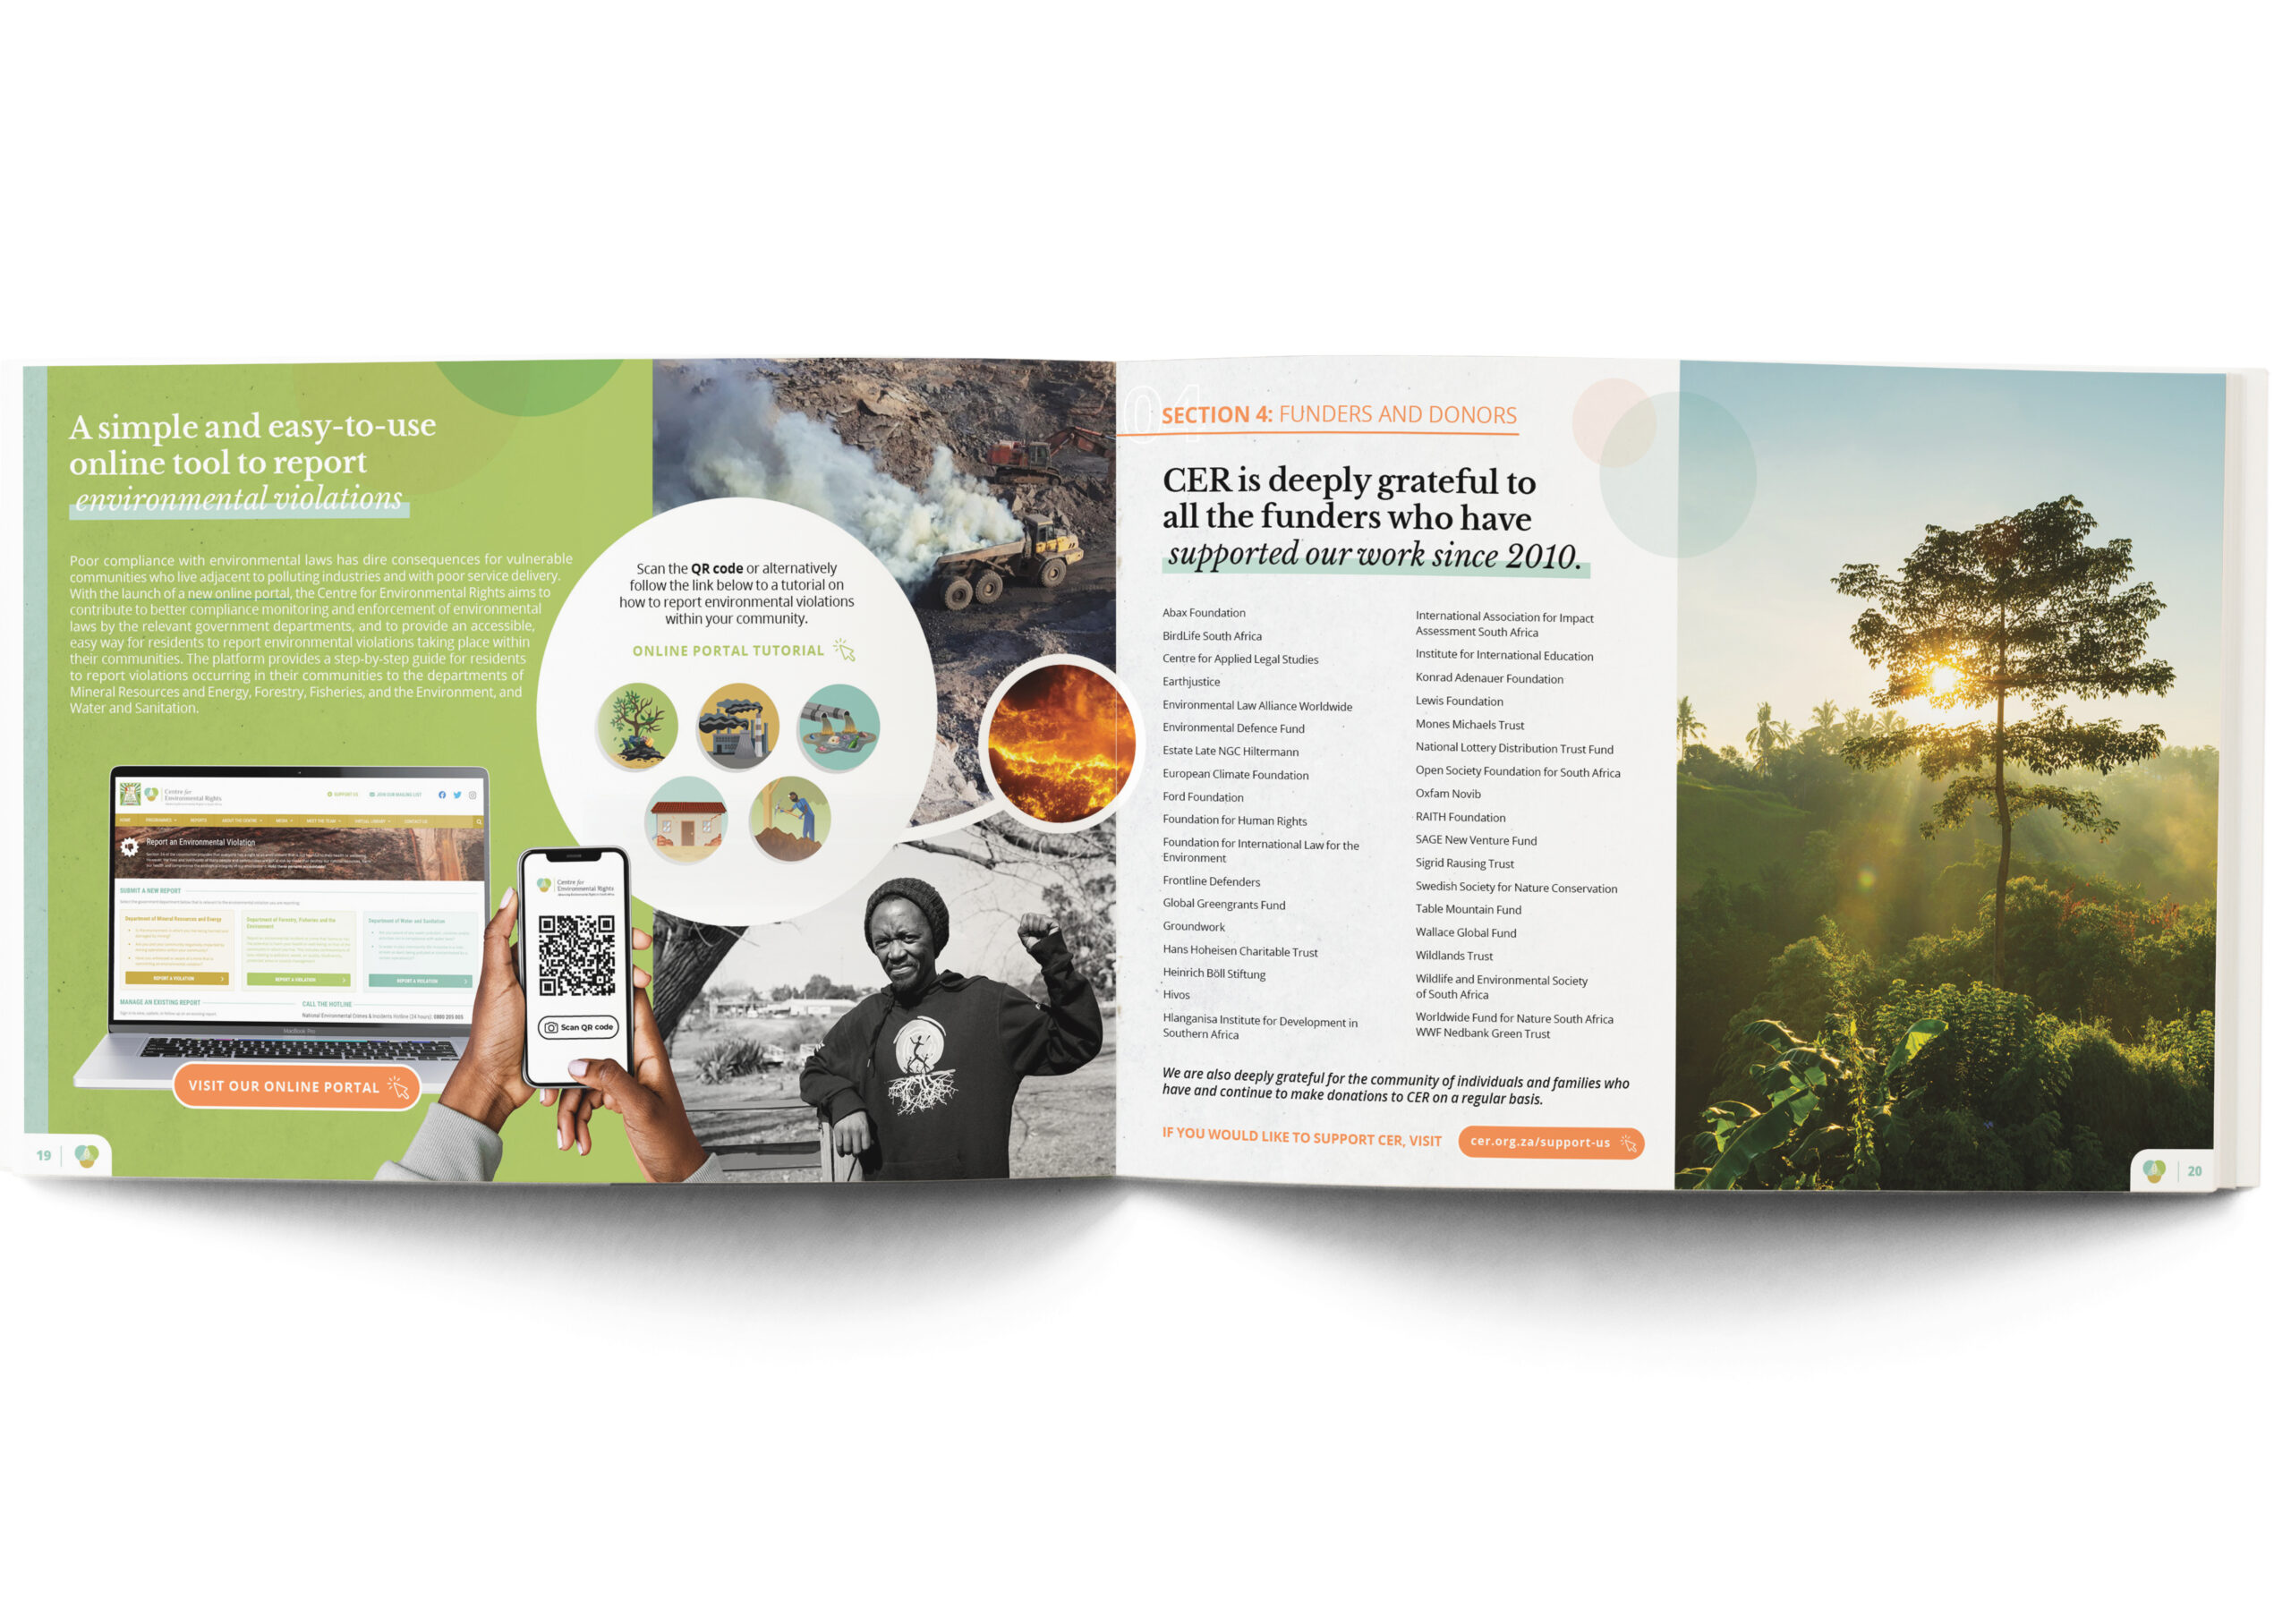 Centre for Environmental Rights – Impact Report – graphic design